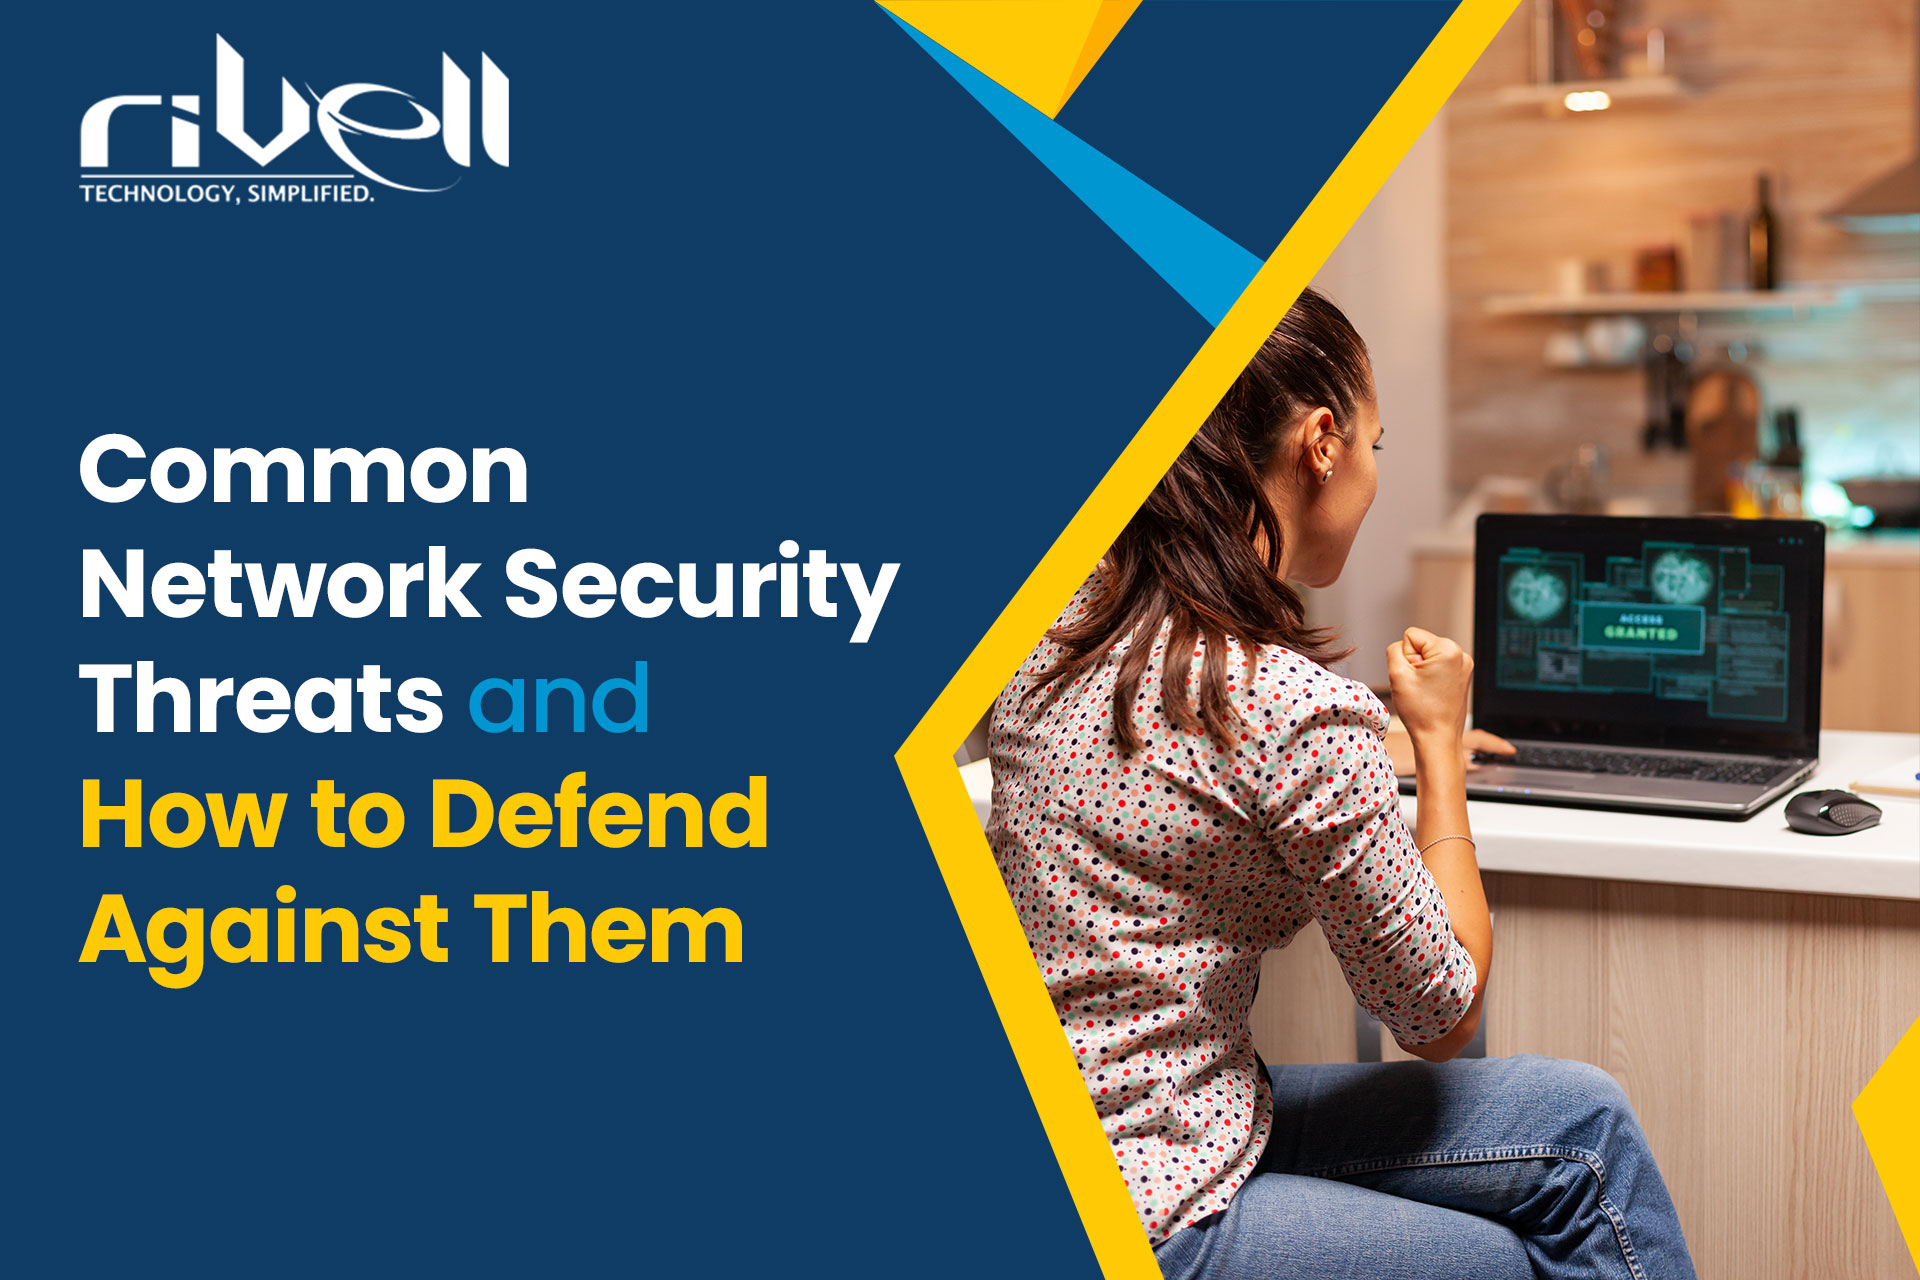 Common network security threats and how to defend against them